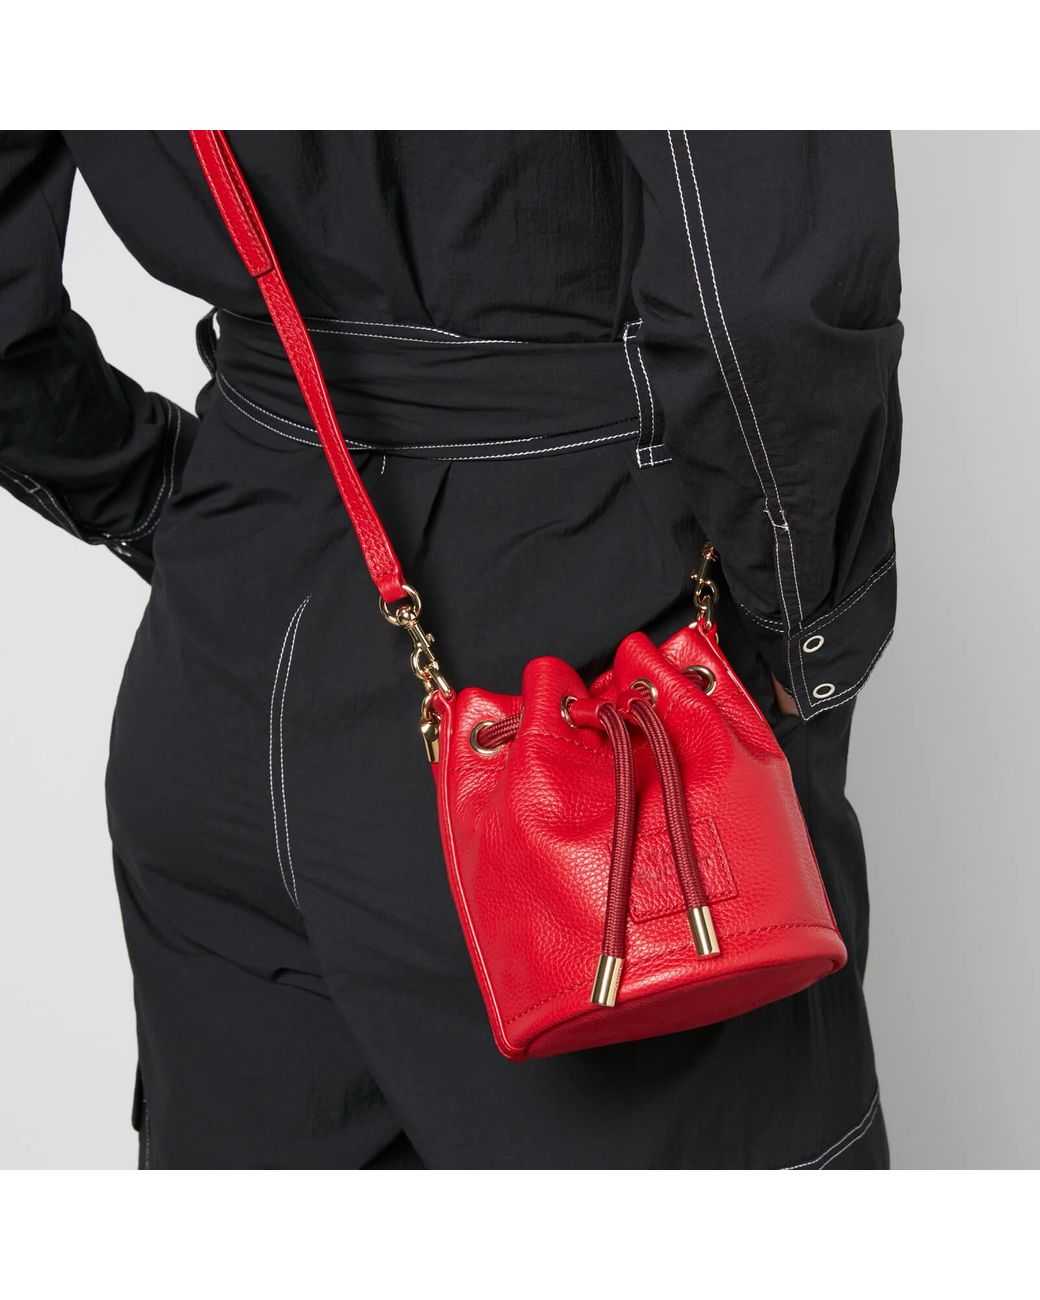 Marc Jacobs Women's The Leather Bucket Bag True Red